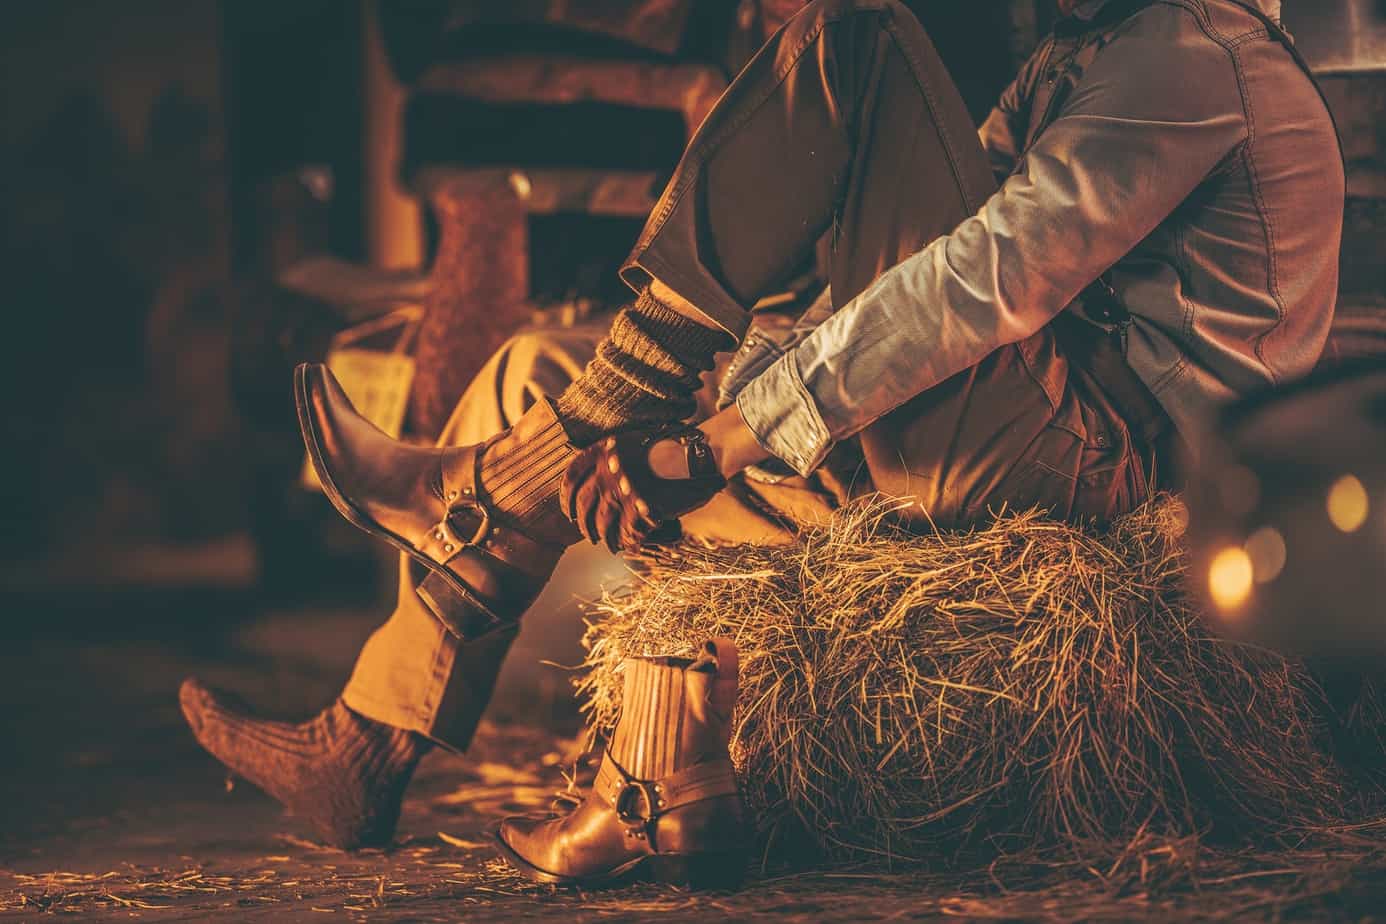 Cowboy in the barn wearing boots while sitting on a pile of hay.